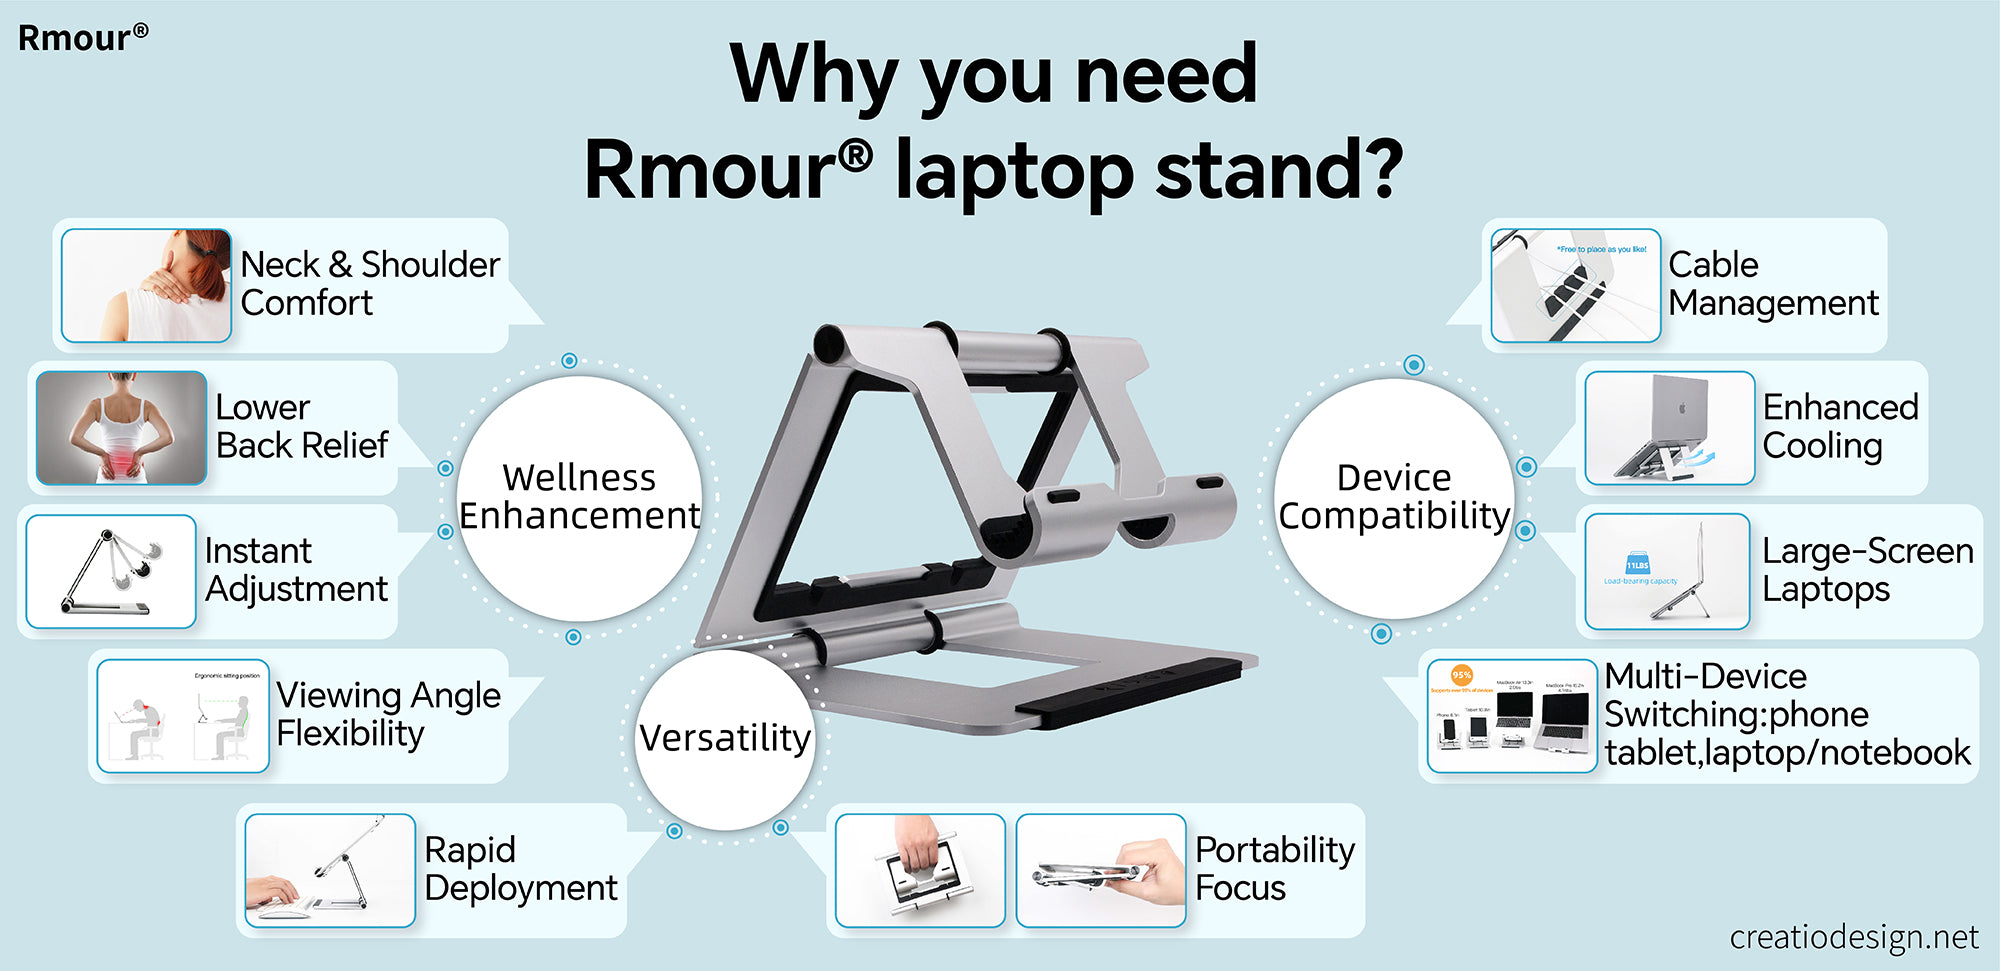 Rmour Laptop Stand: The Lightweight, Foldable Stand for Everyday Ergonomics